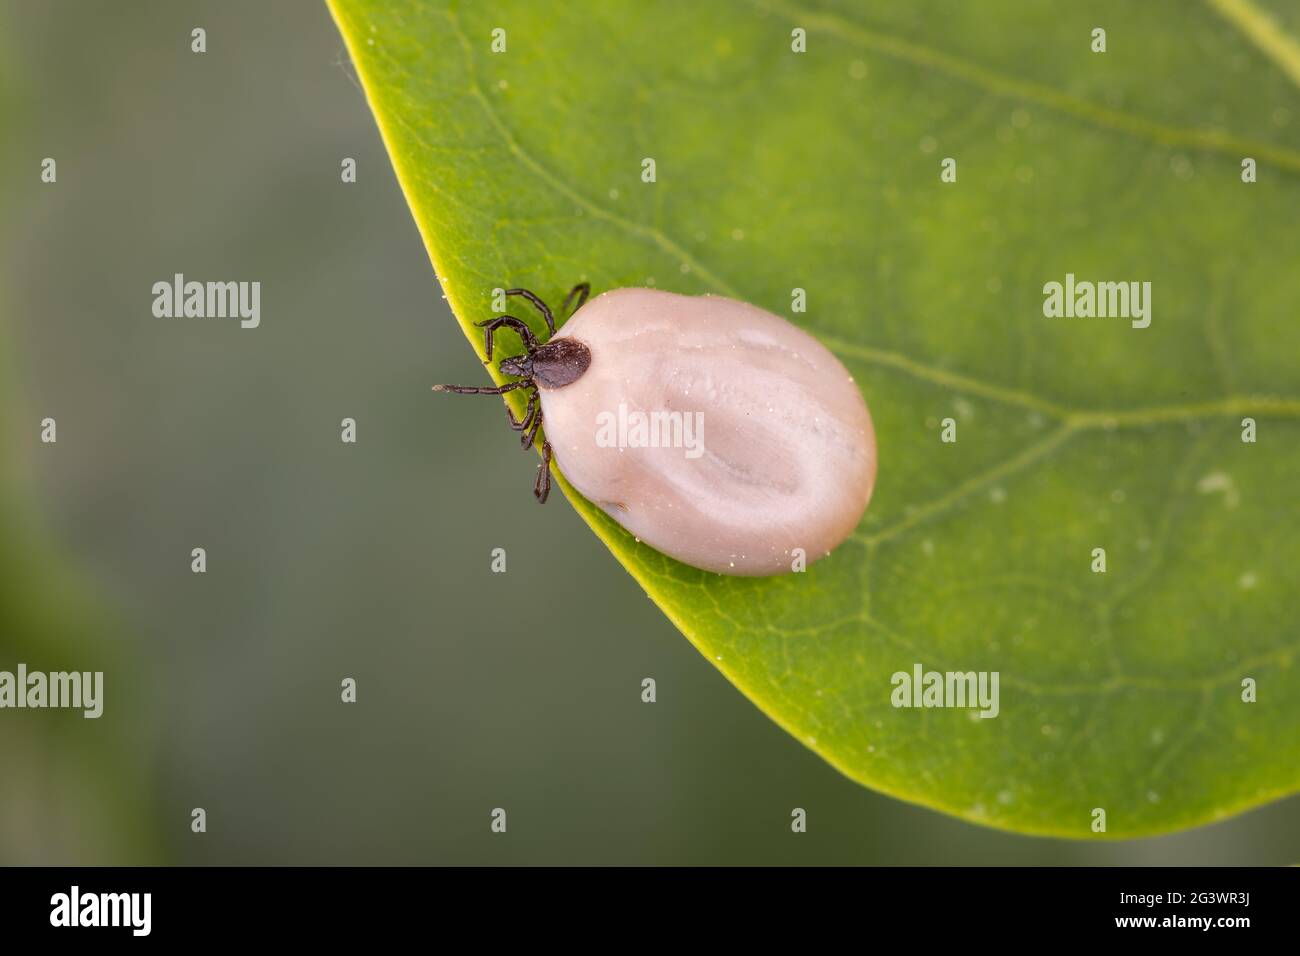 Tick Danger insect Stock Photo